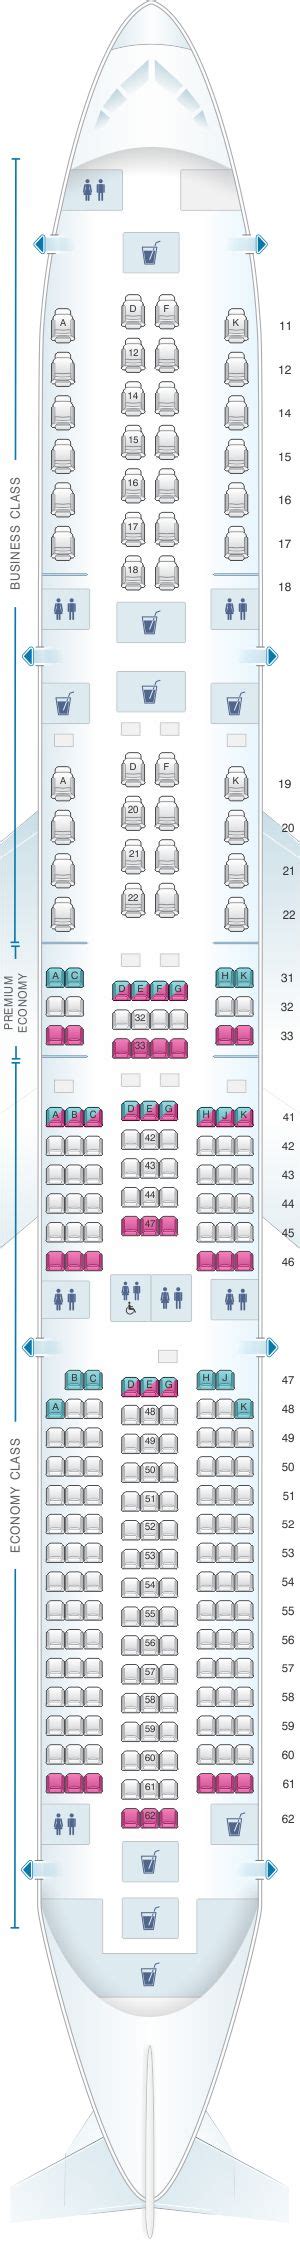 Seat Map Singapore Airlines Airbus A350 900 Singapore Airlines